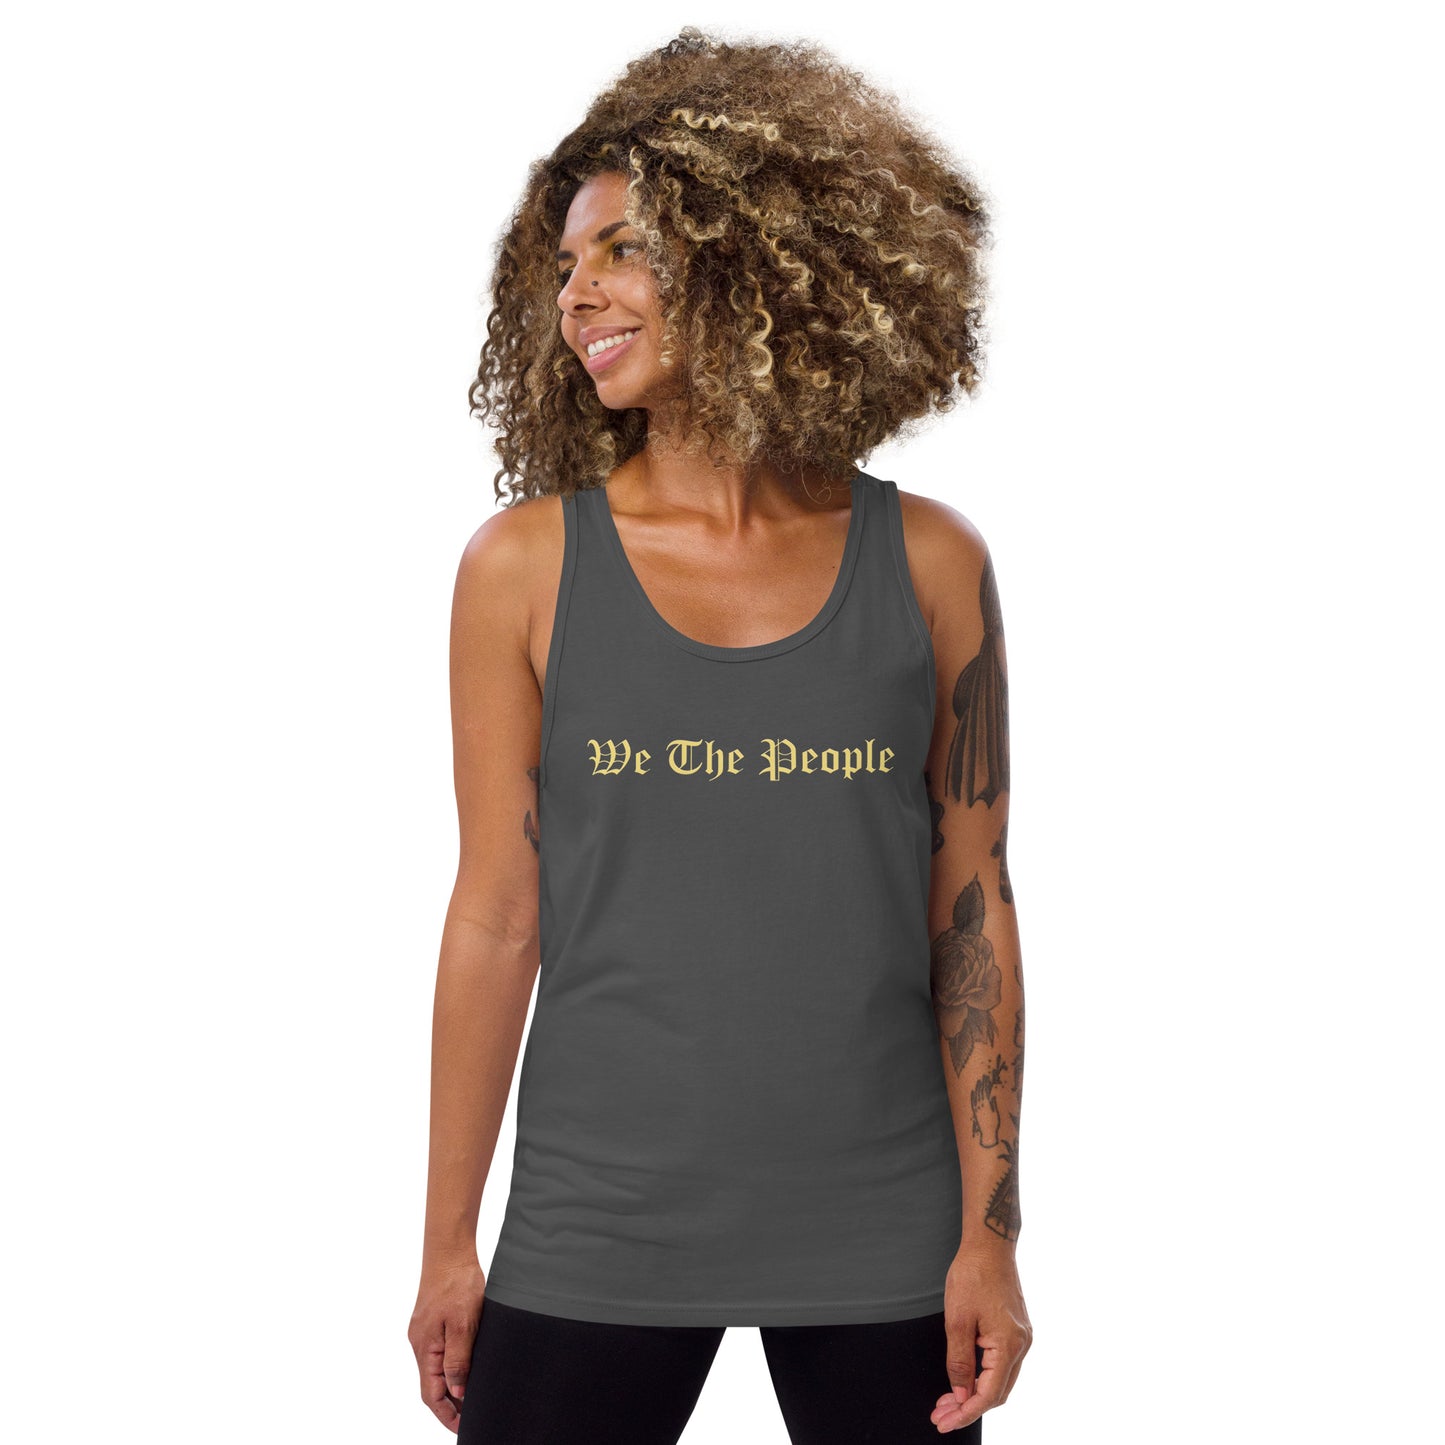 We The people Tank Top